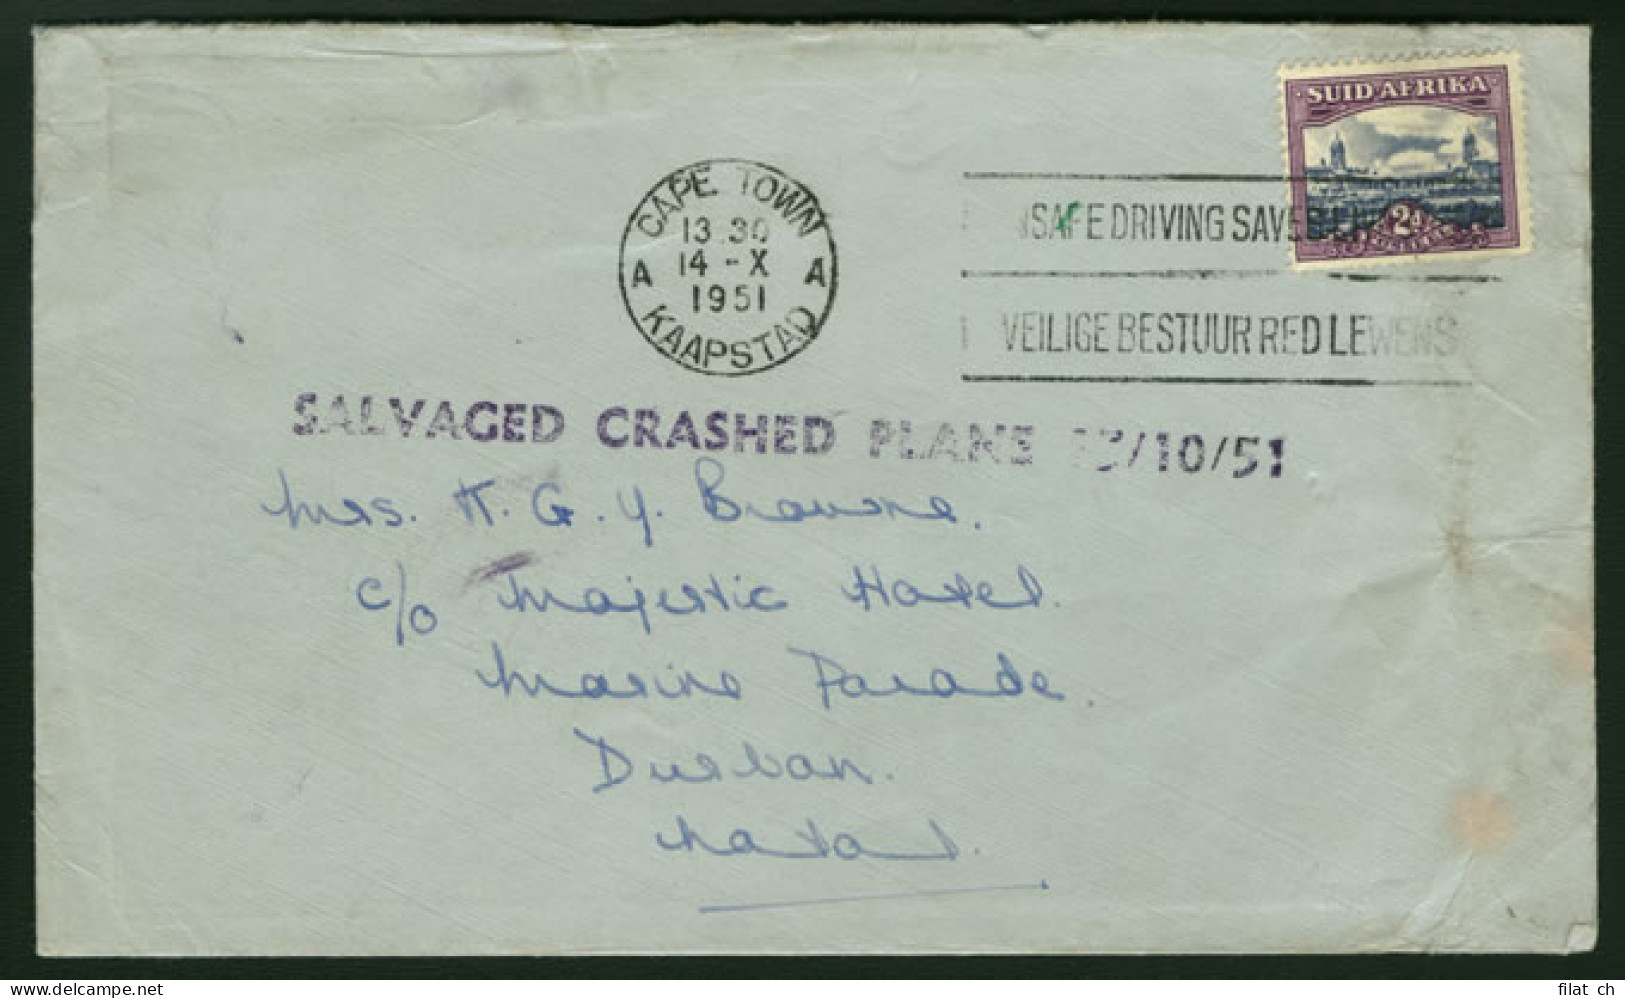 South Africa 1951 SAA Paardeberg Crash Cover, Scarce - Luchtpost